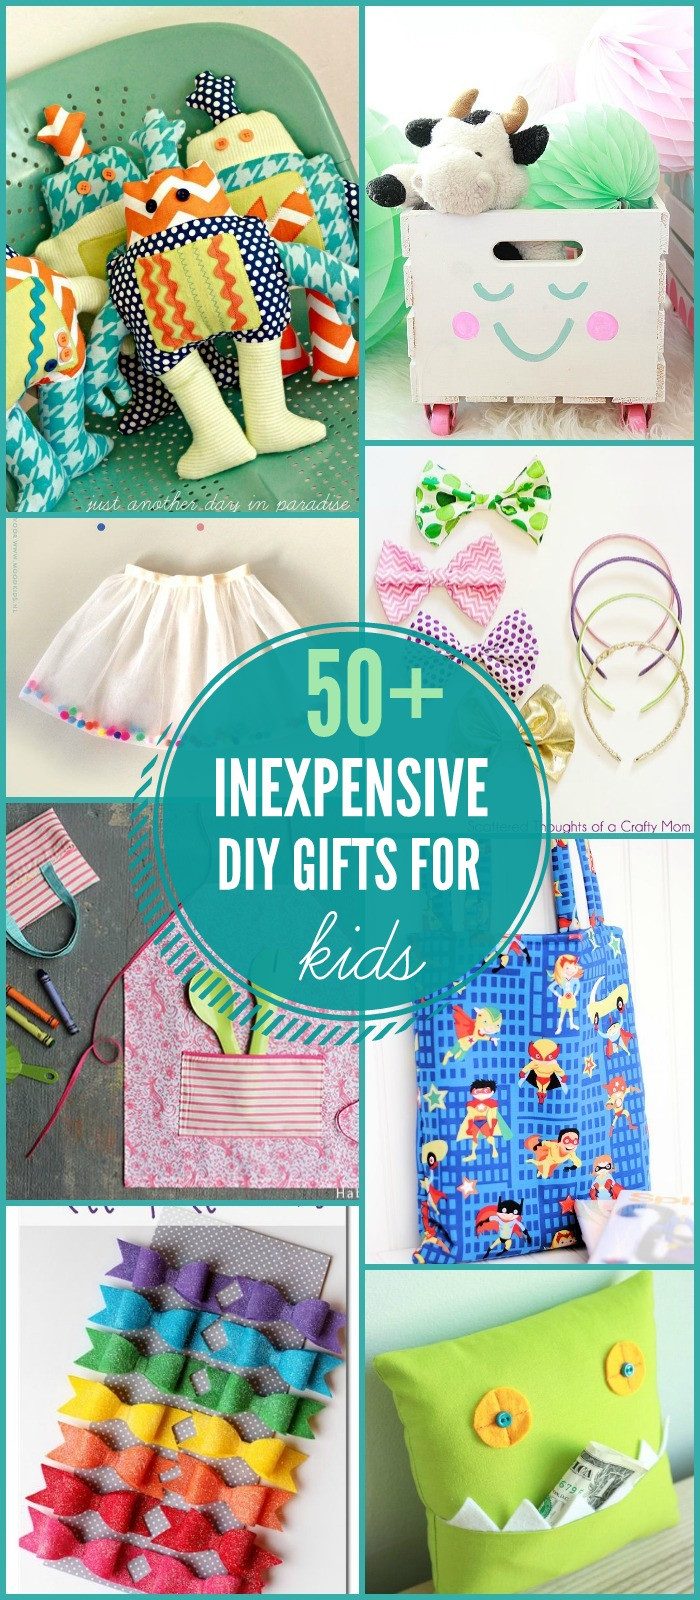 DIY Christmas Gifts From Kids
 DIY Gifts for Kids